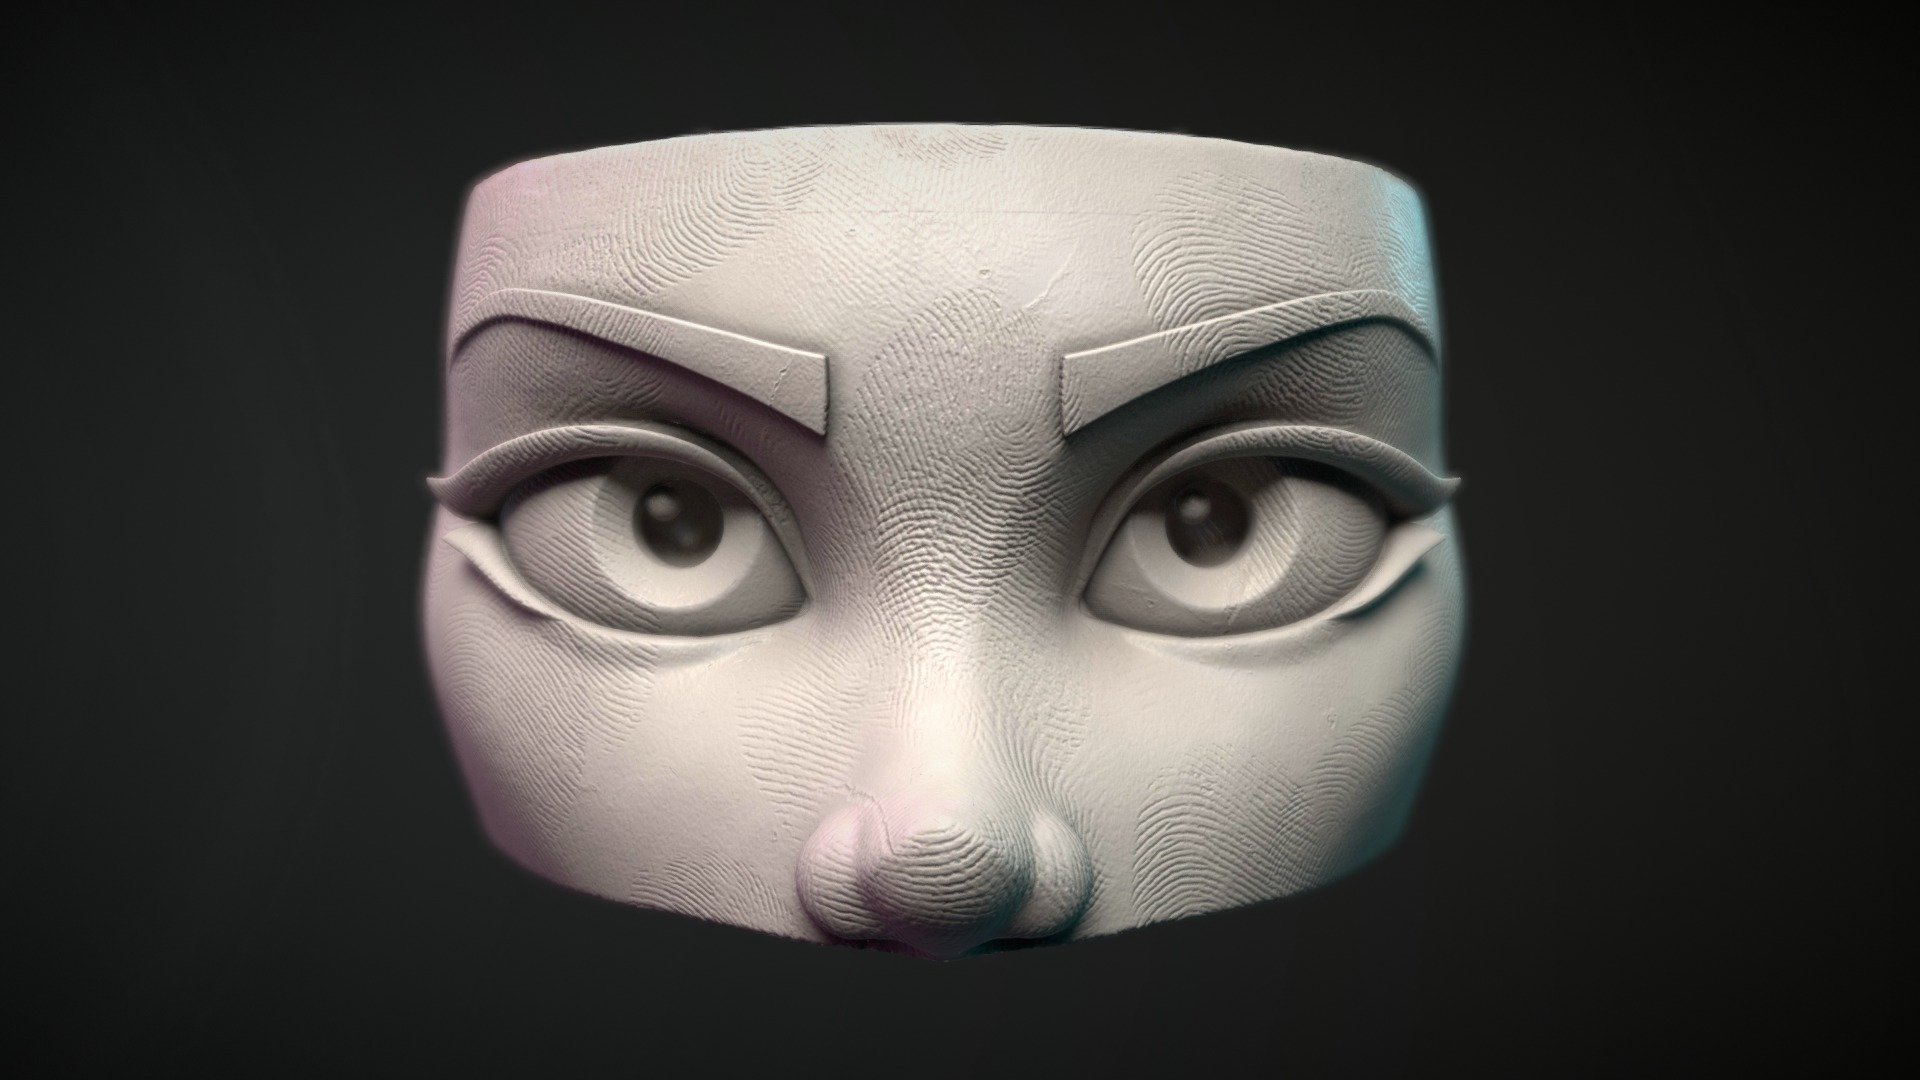 Day 8 for SculptJanuary with the topic &ldquo;Anatomy - Eyes